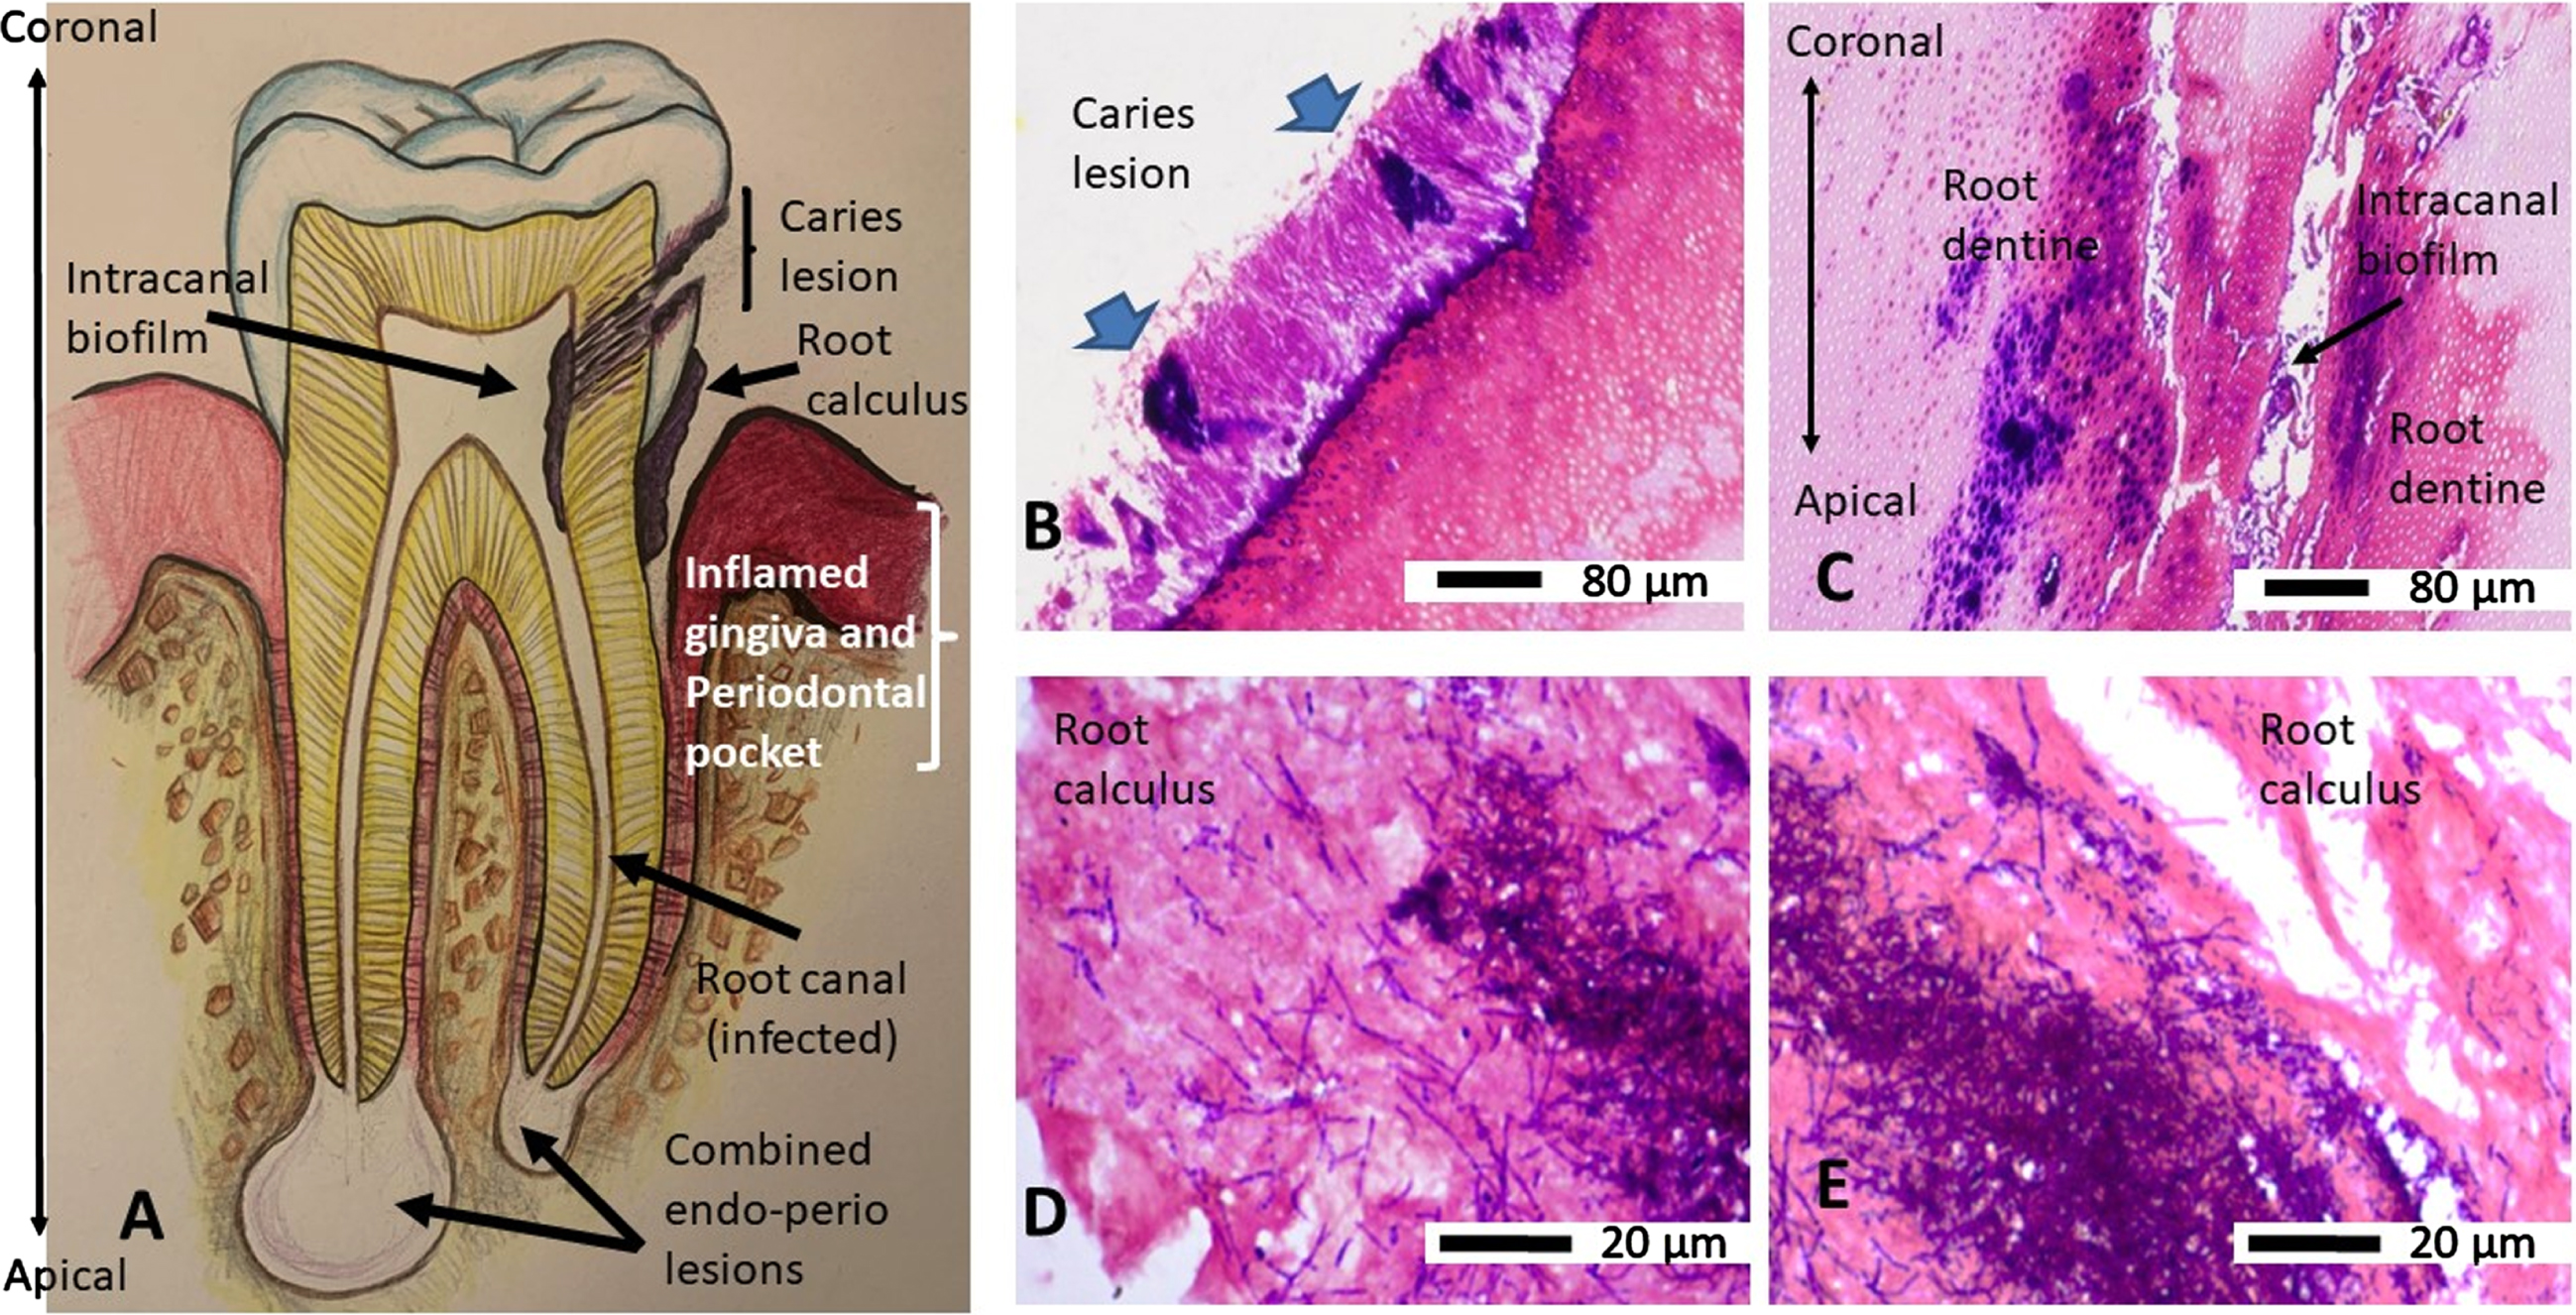 An overview and orientation of a diseased tooth (line drawing) and Gram’s stain characteristics of the infecting bacteria. Panel A is a line drawing of a tooth as a map for the tissues and their orientation in Gram-stained images. B) Demineralized, paraffin wax embedded, rehydrated section of a tooth from a primary root canal infection (Group A) showing a carious lesion with clusters of Gram-positive (blue) bacteria (blue arrows) and Gram-variable bacteria on the external surface. C) Same tissue section as in B shows the infection had spread internally within the canal and dentinal tubules of the tooth. Double headed arrow indicates the coronal to apical orientation of the root canal space and adjacent root dentine with respect to panel A. D, E) Paraffin wax embedded, rehydrated sections of scraped root calculus shows both Gram-positive (blue) bacteria intermingled with filamentous and non-filamentous Gram-variable bacteria.